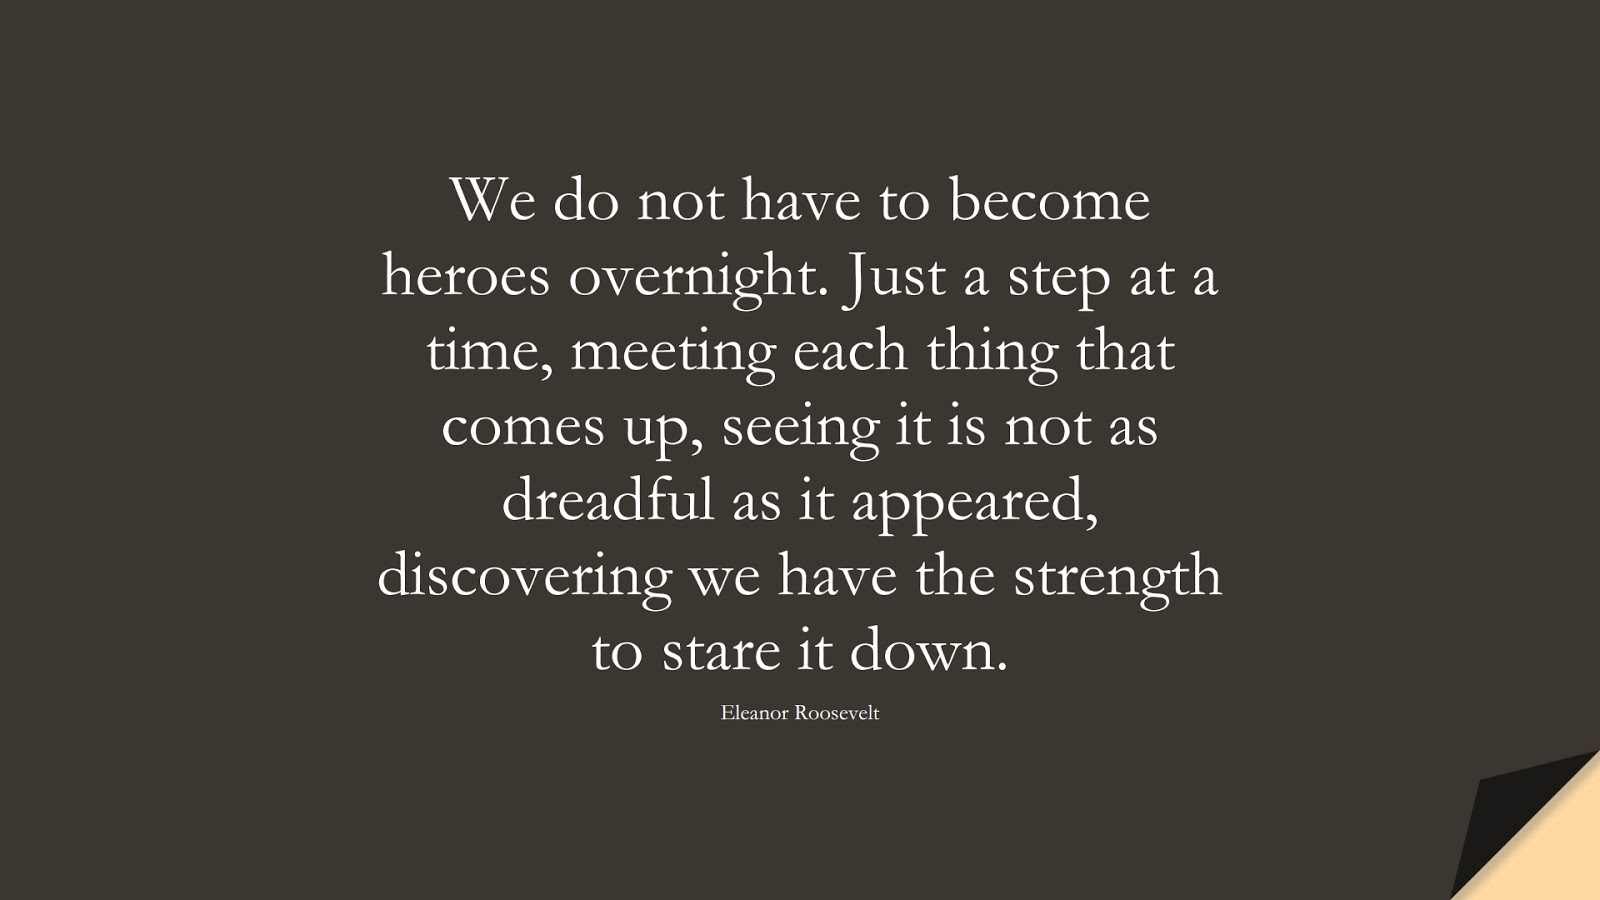 We do not have to become heroes overnight. Just a step at a time, meeting each thing that comes up, seeing it is not as dreadful as it appeared, discovering we have the strength to stare it down. (Eleanor Roosevelt);  #CourageQuotes